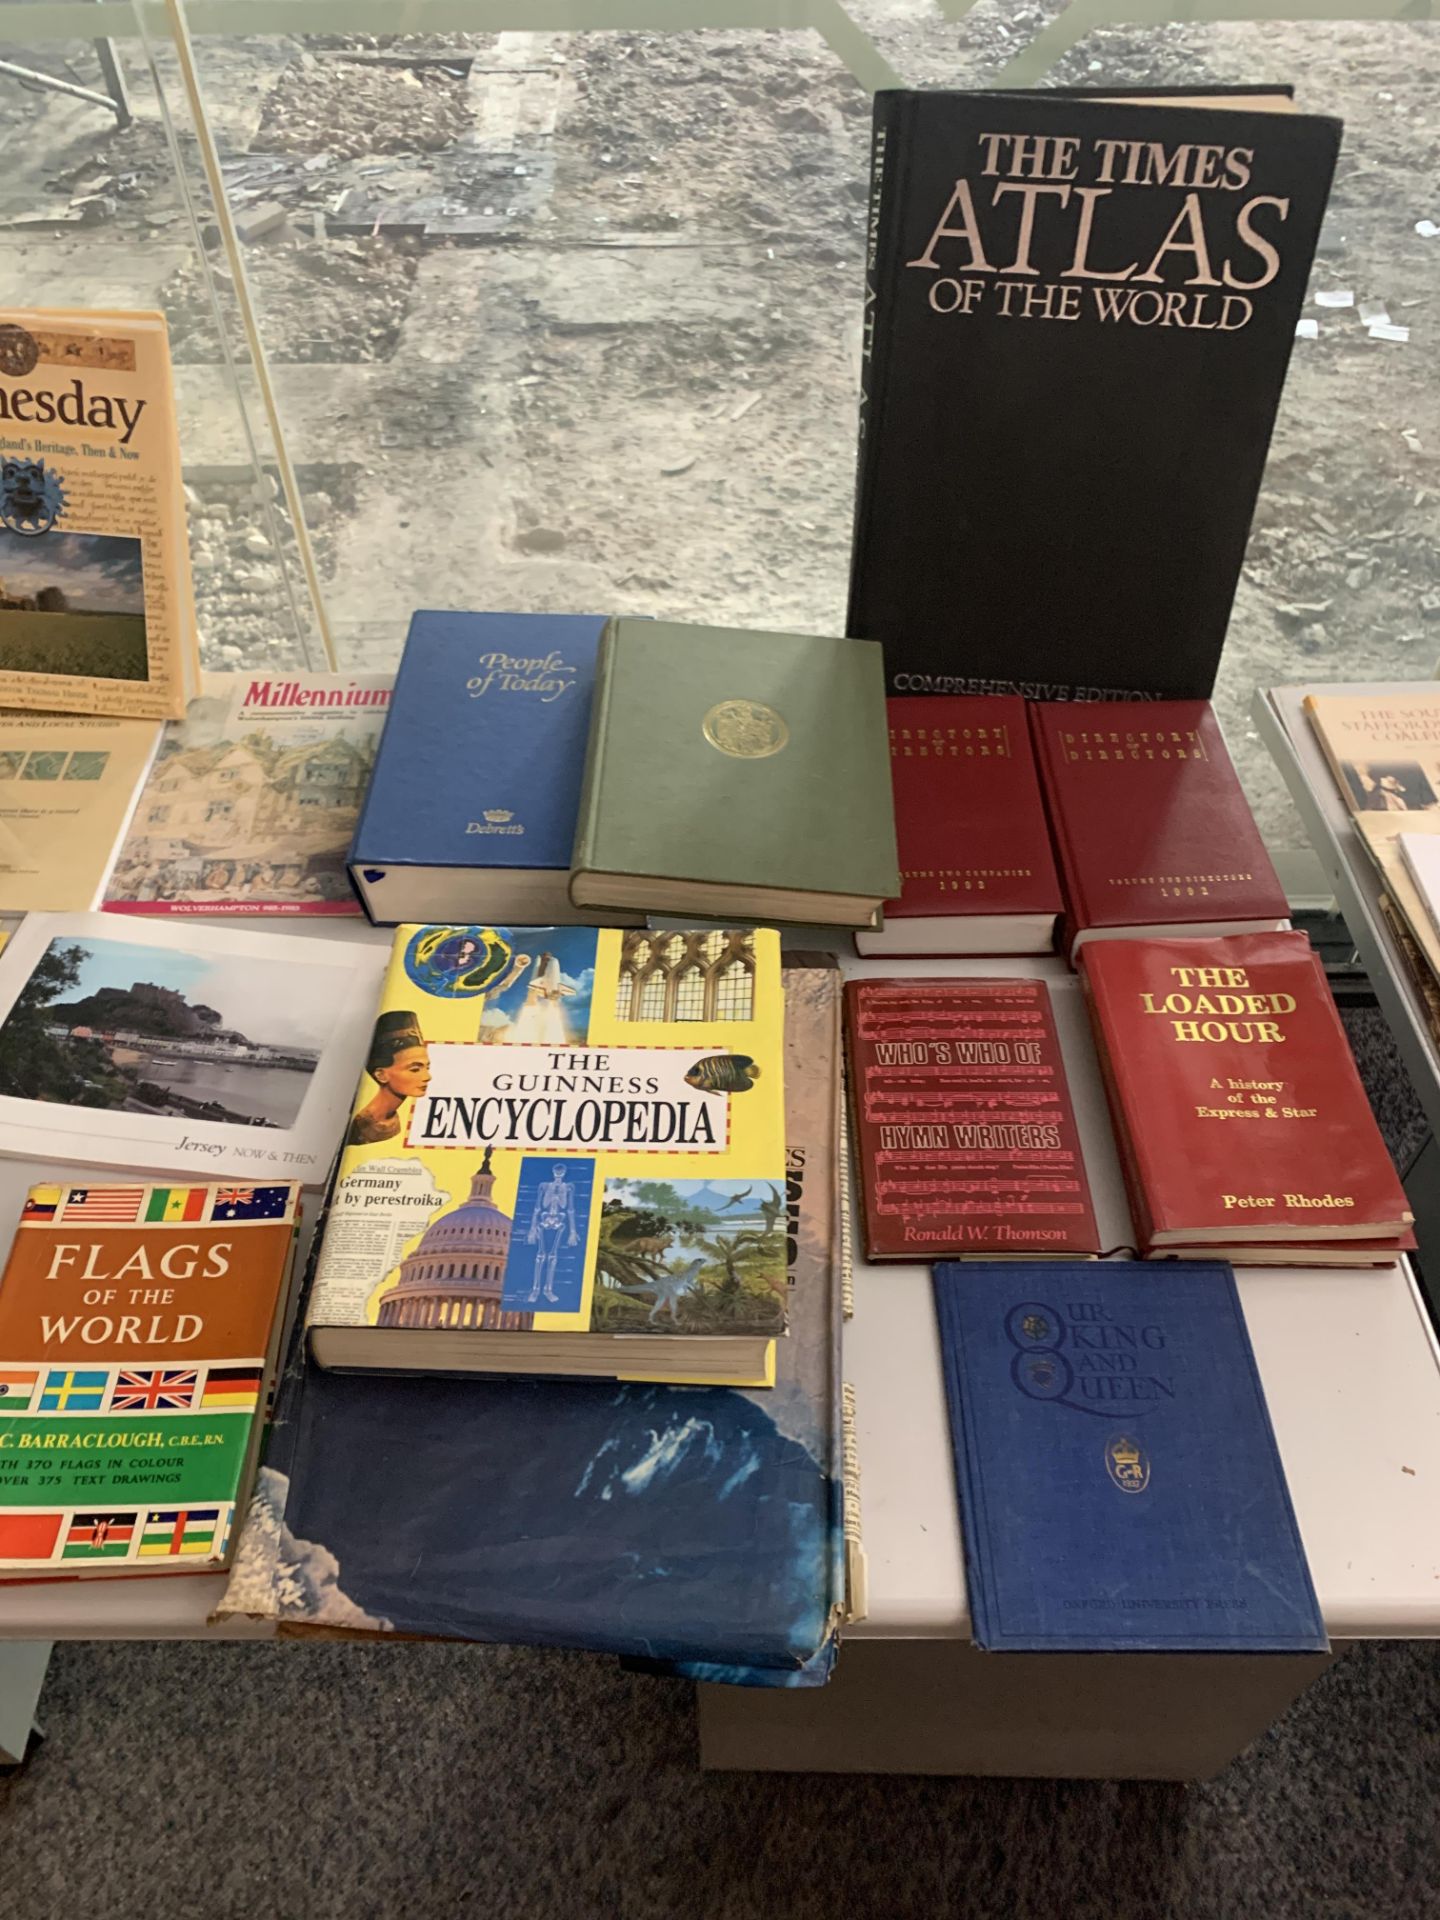 A collection of books including Encyclopedias, History, Flags of the World and Atlases.